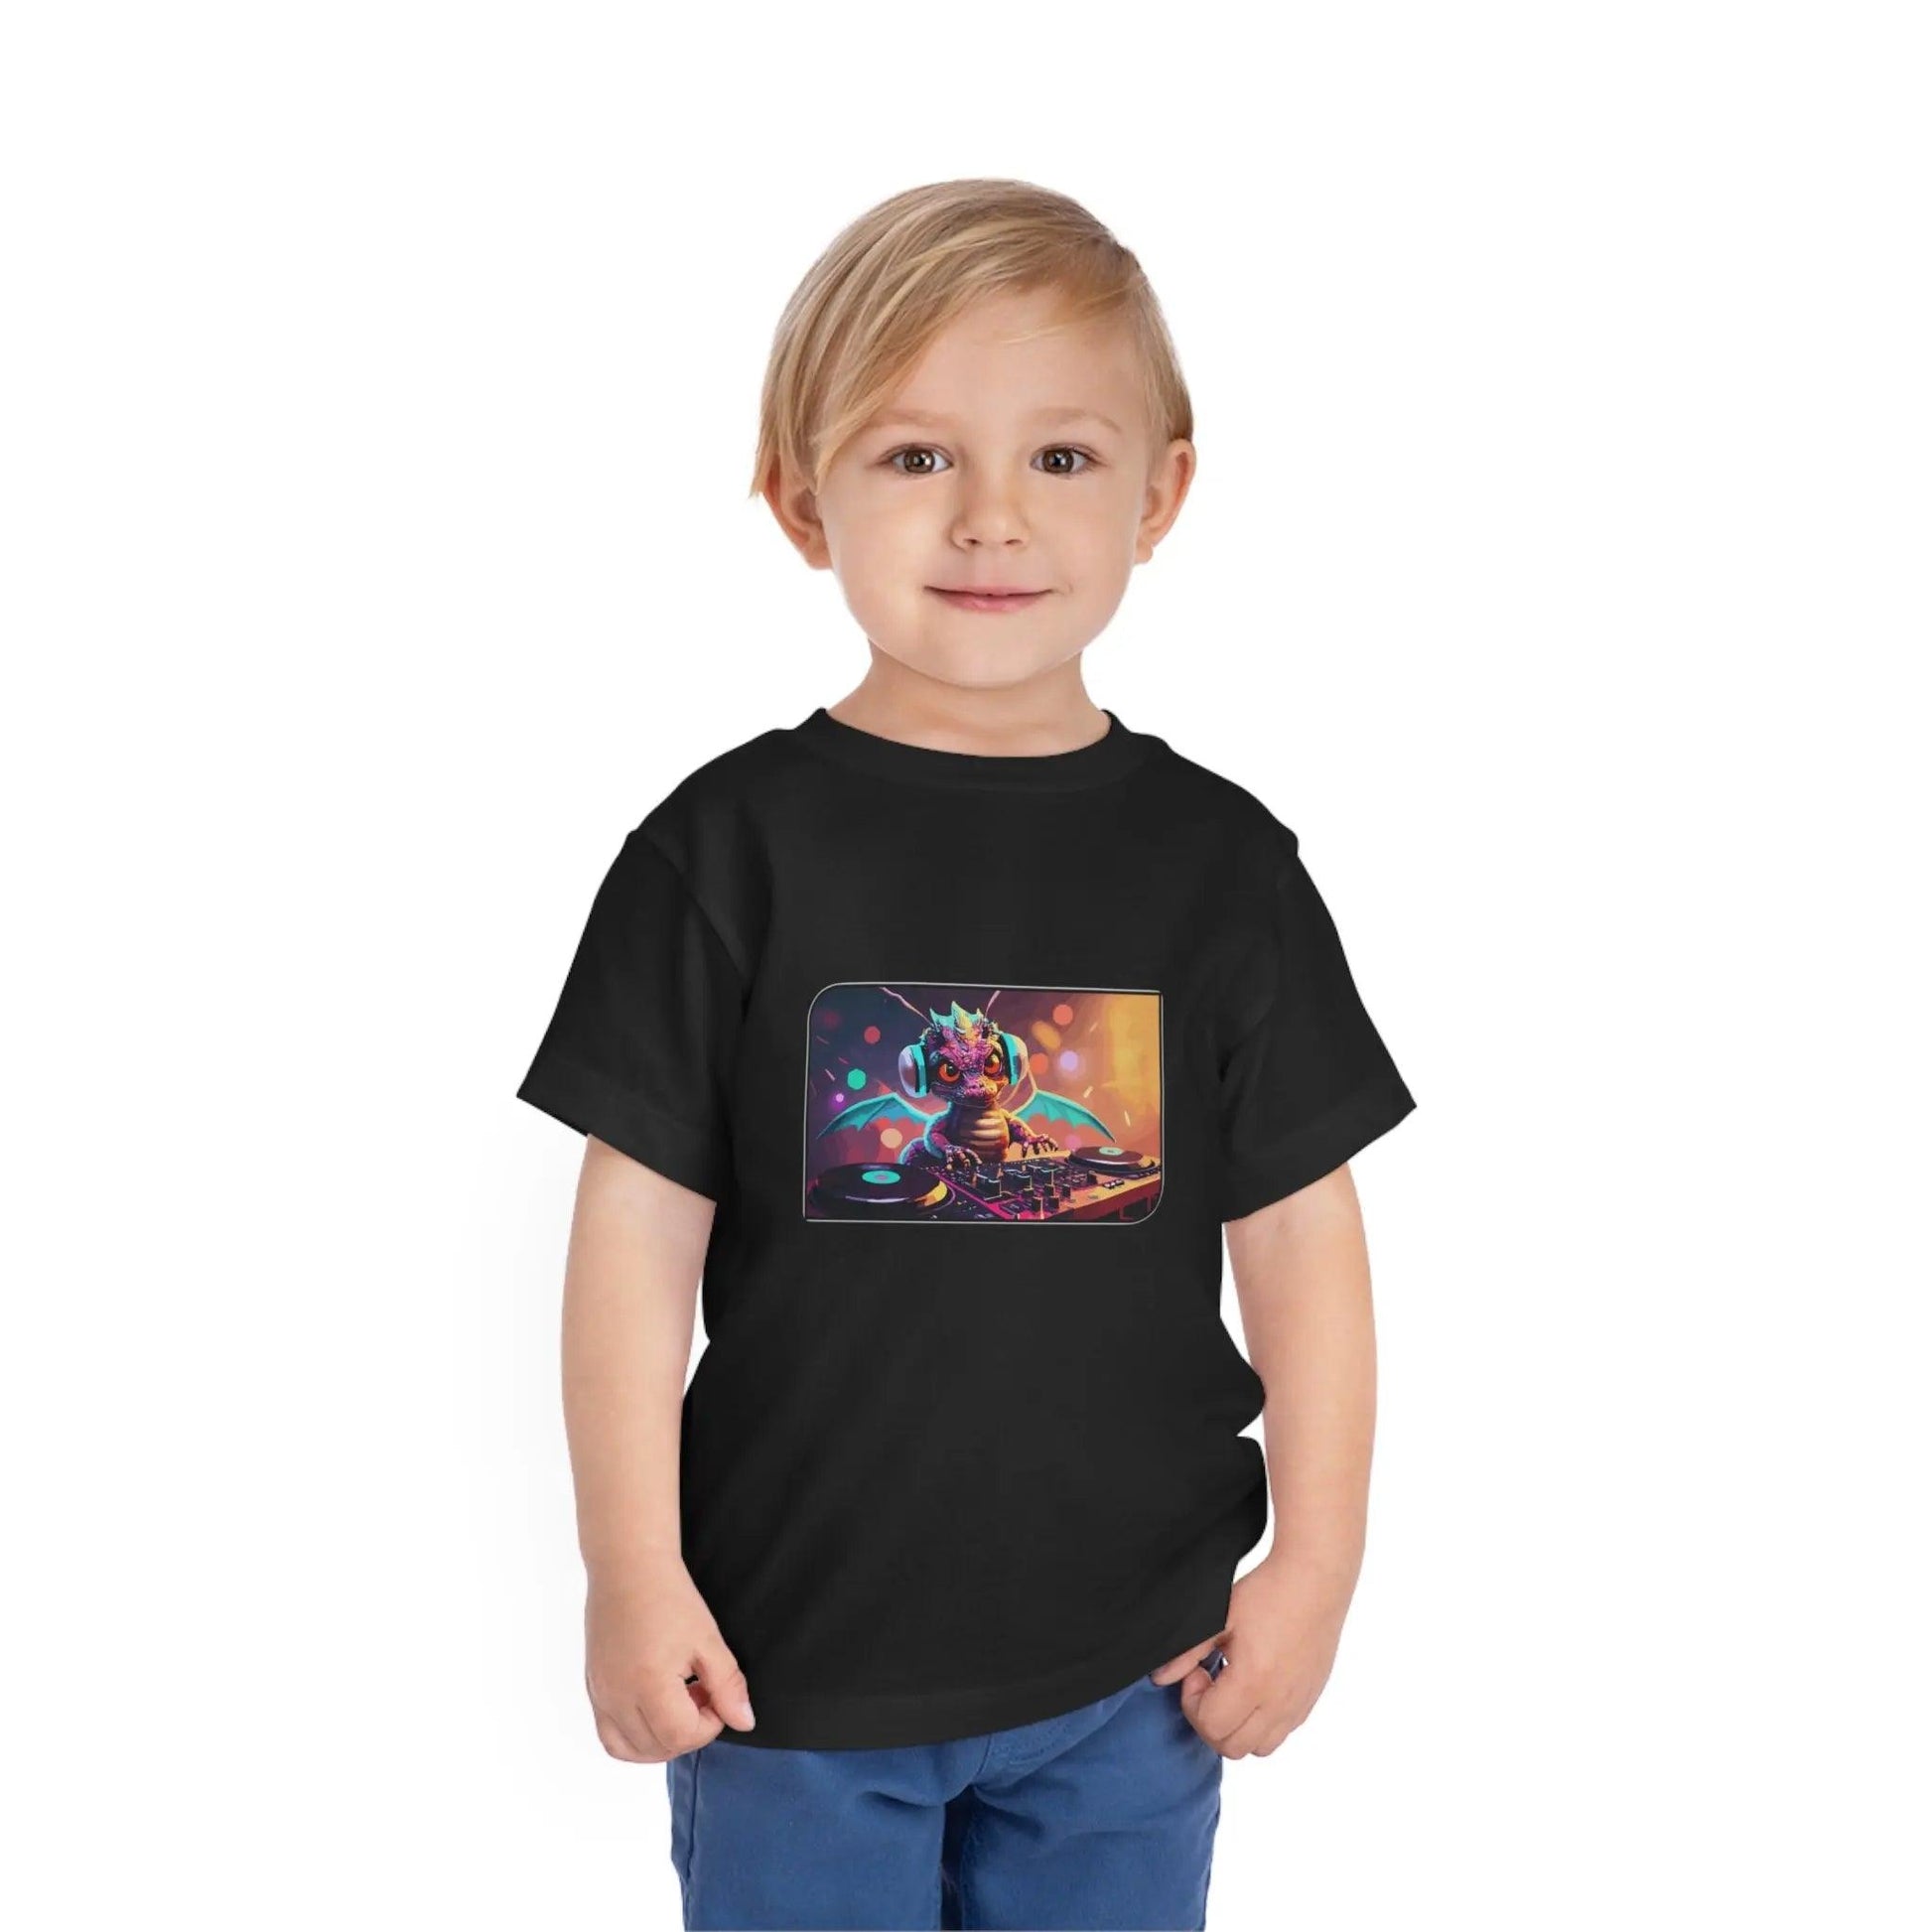 Toddler Short Sleeve Tee Kids clothes